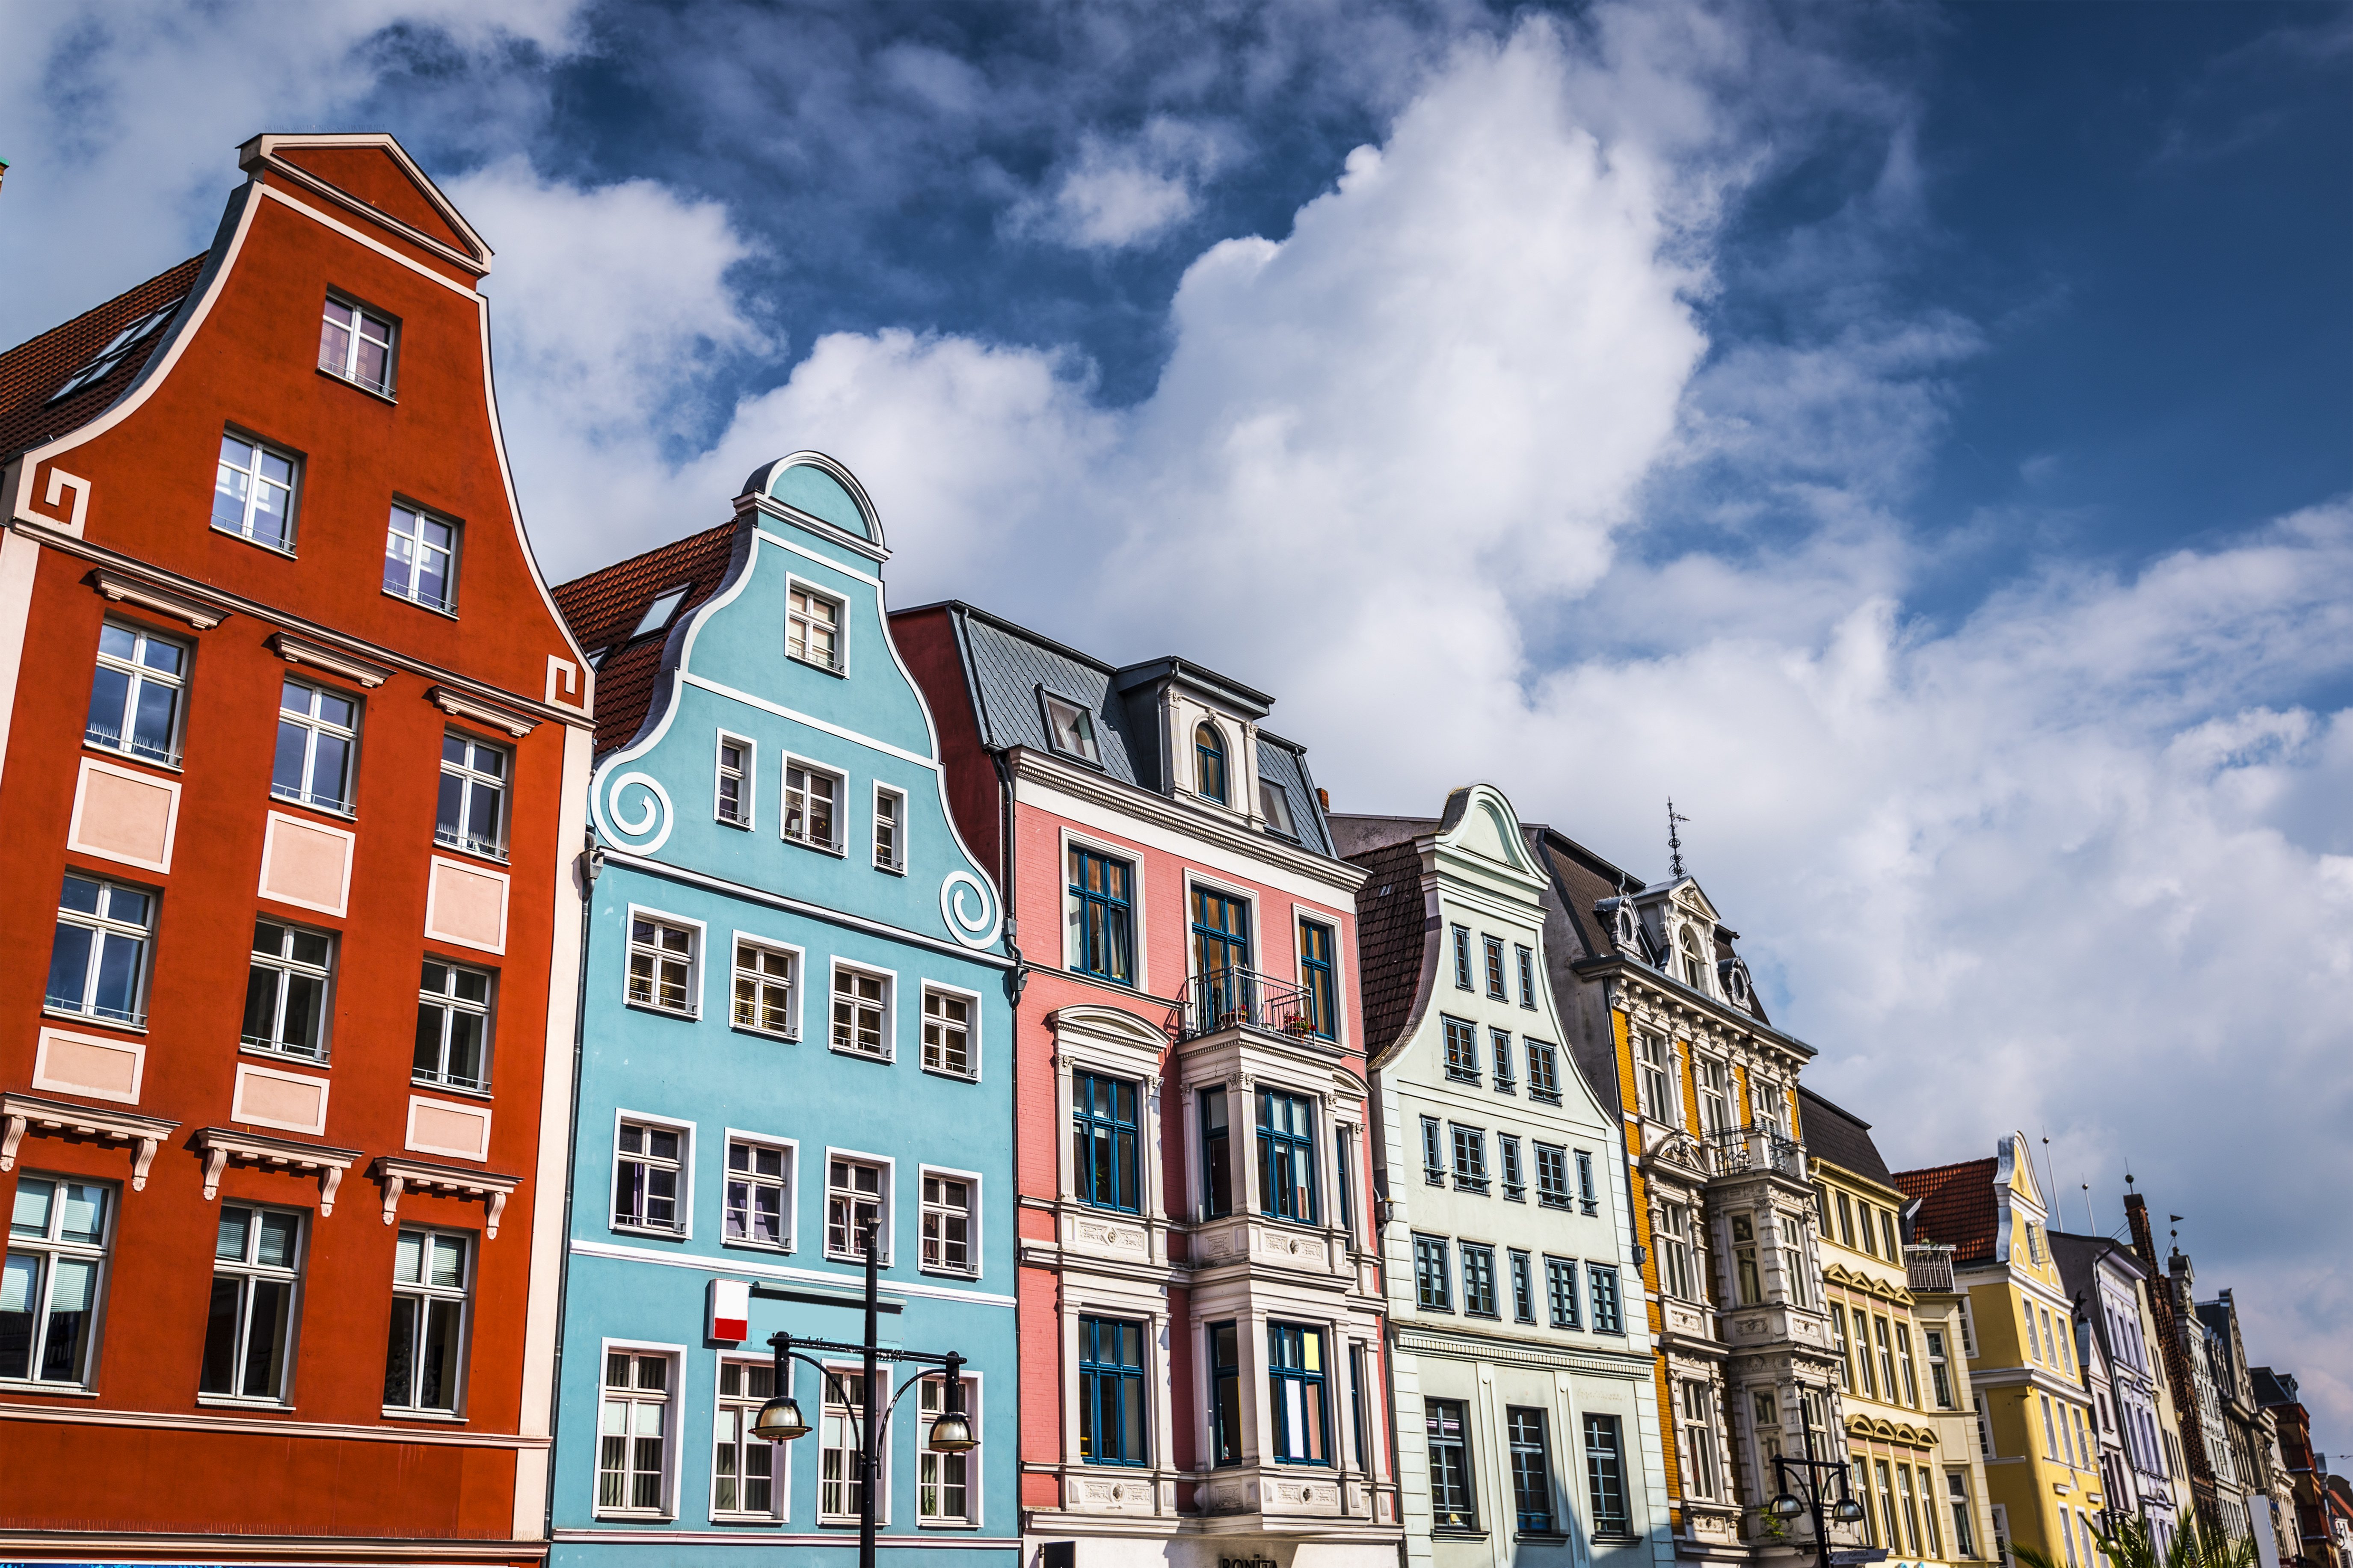 A colourful row of houses in the city centre of Rostock